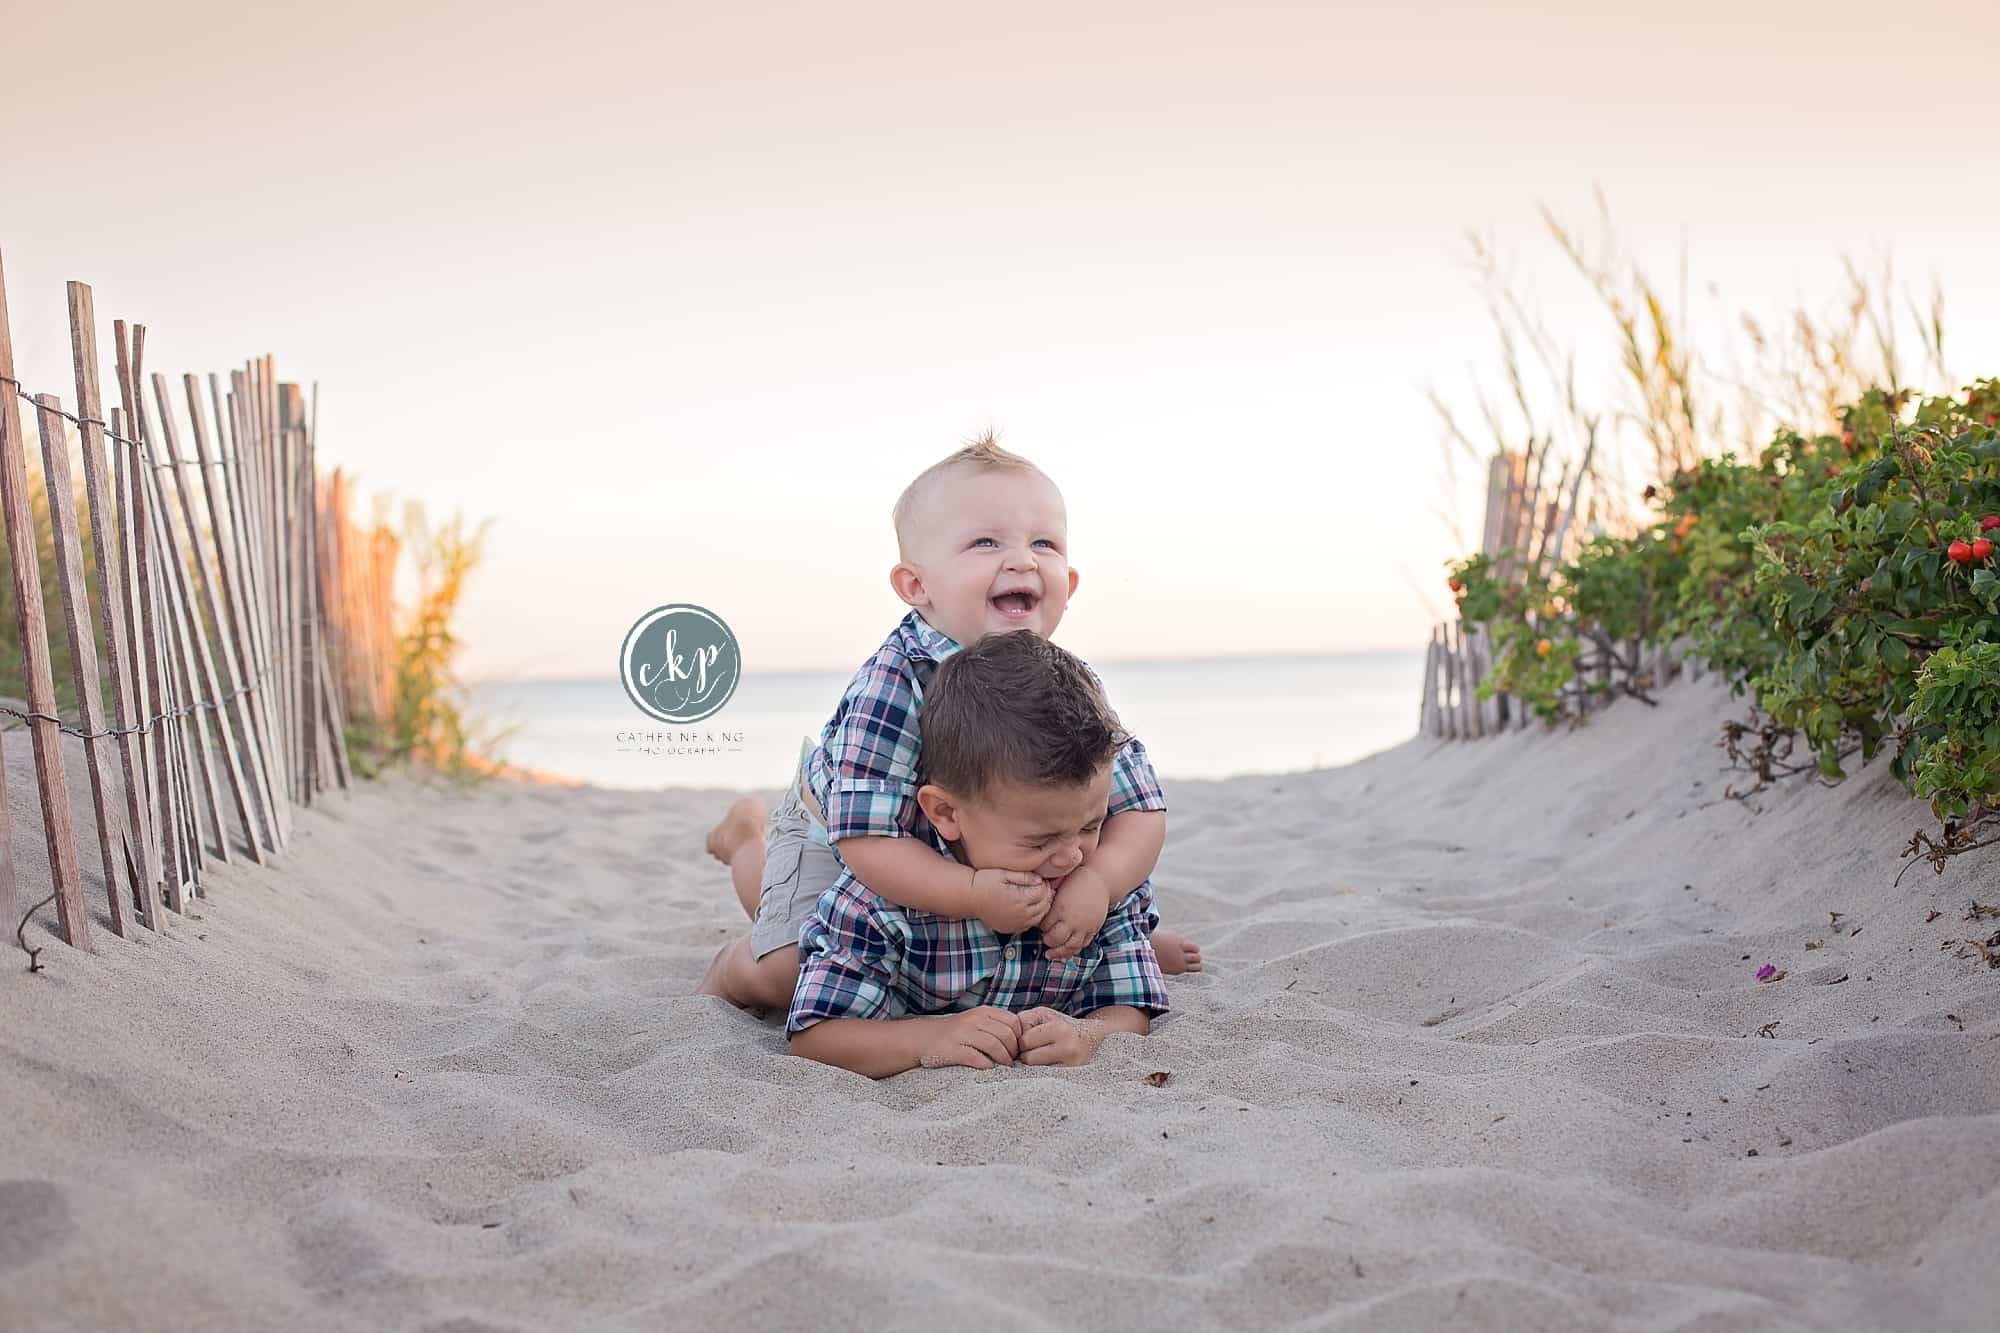 hammonasset state beach photography session at sunset with catherine king photography a ct family photographer based in madison ct